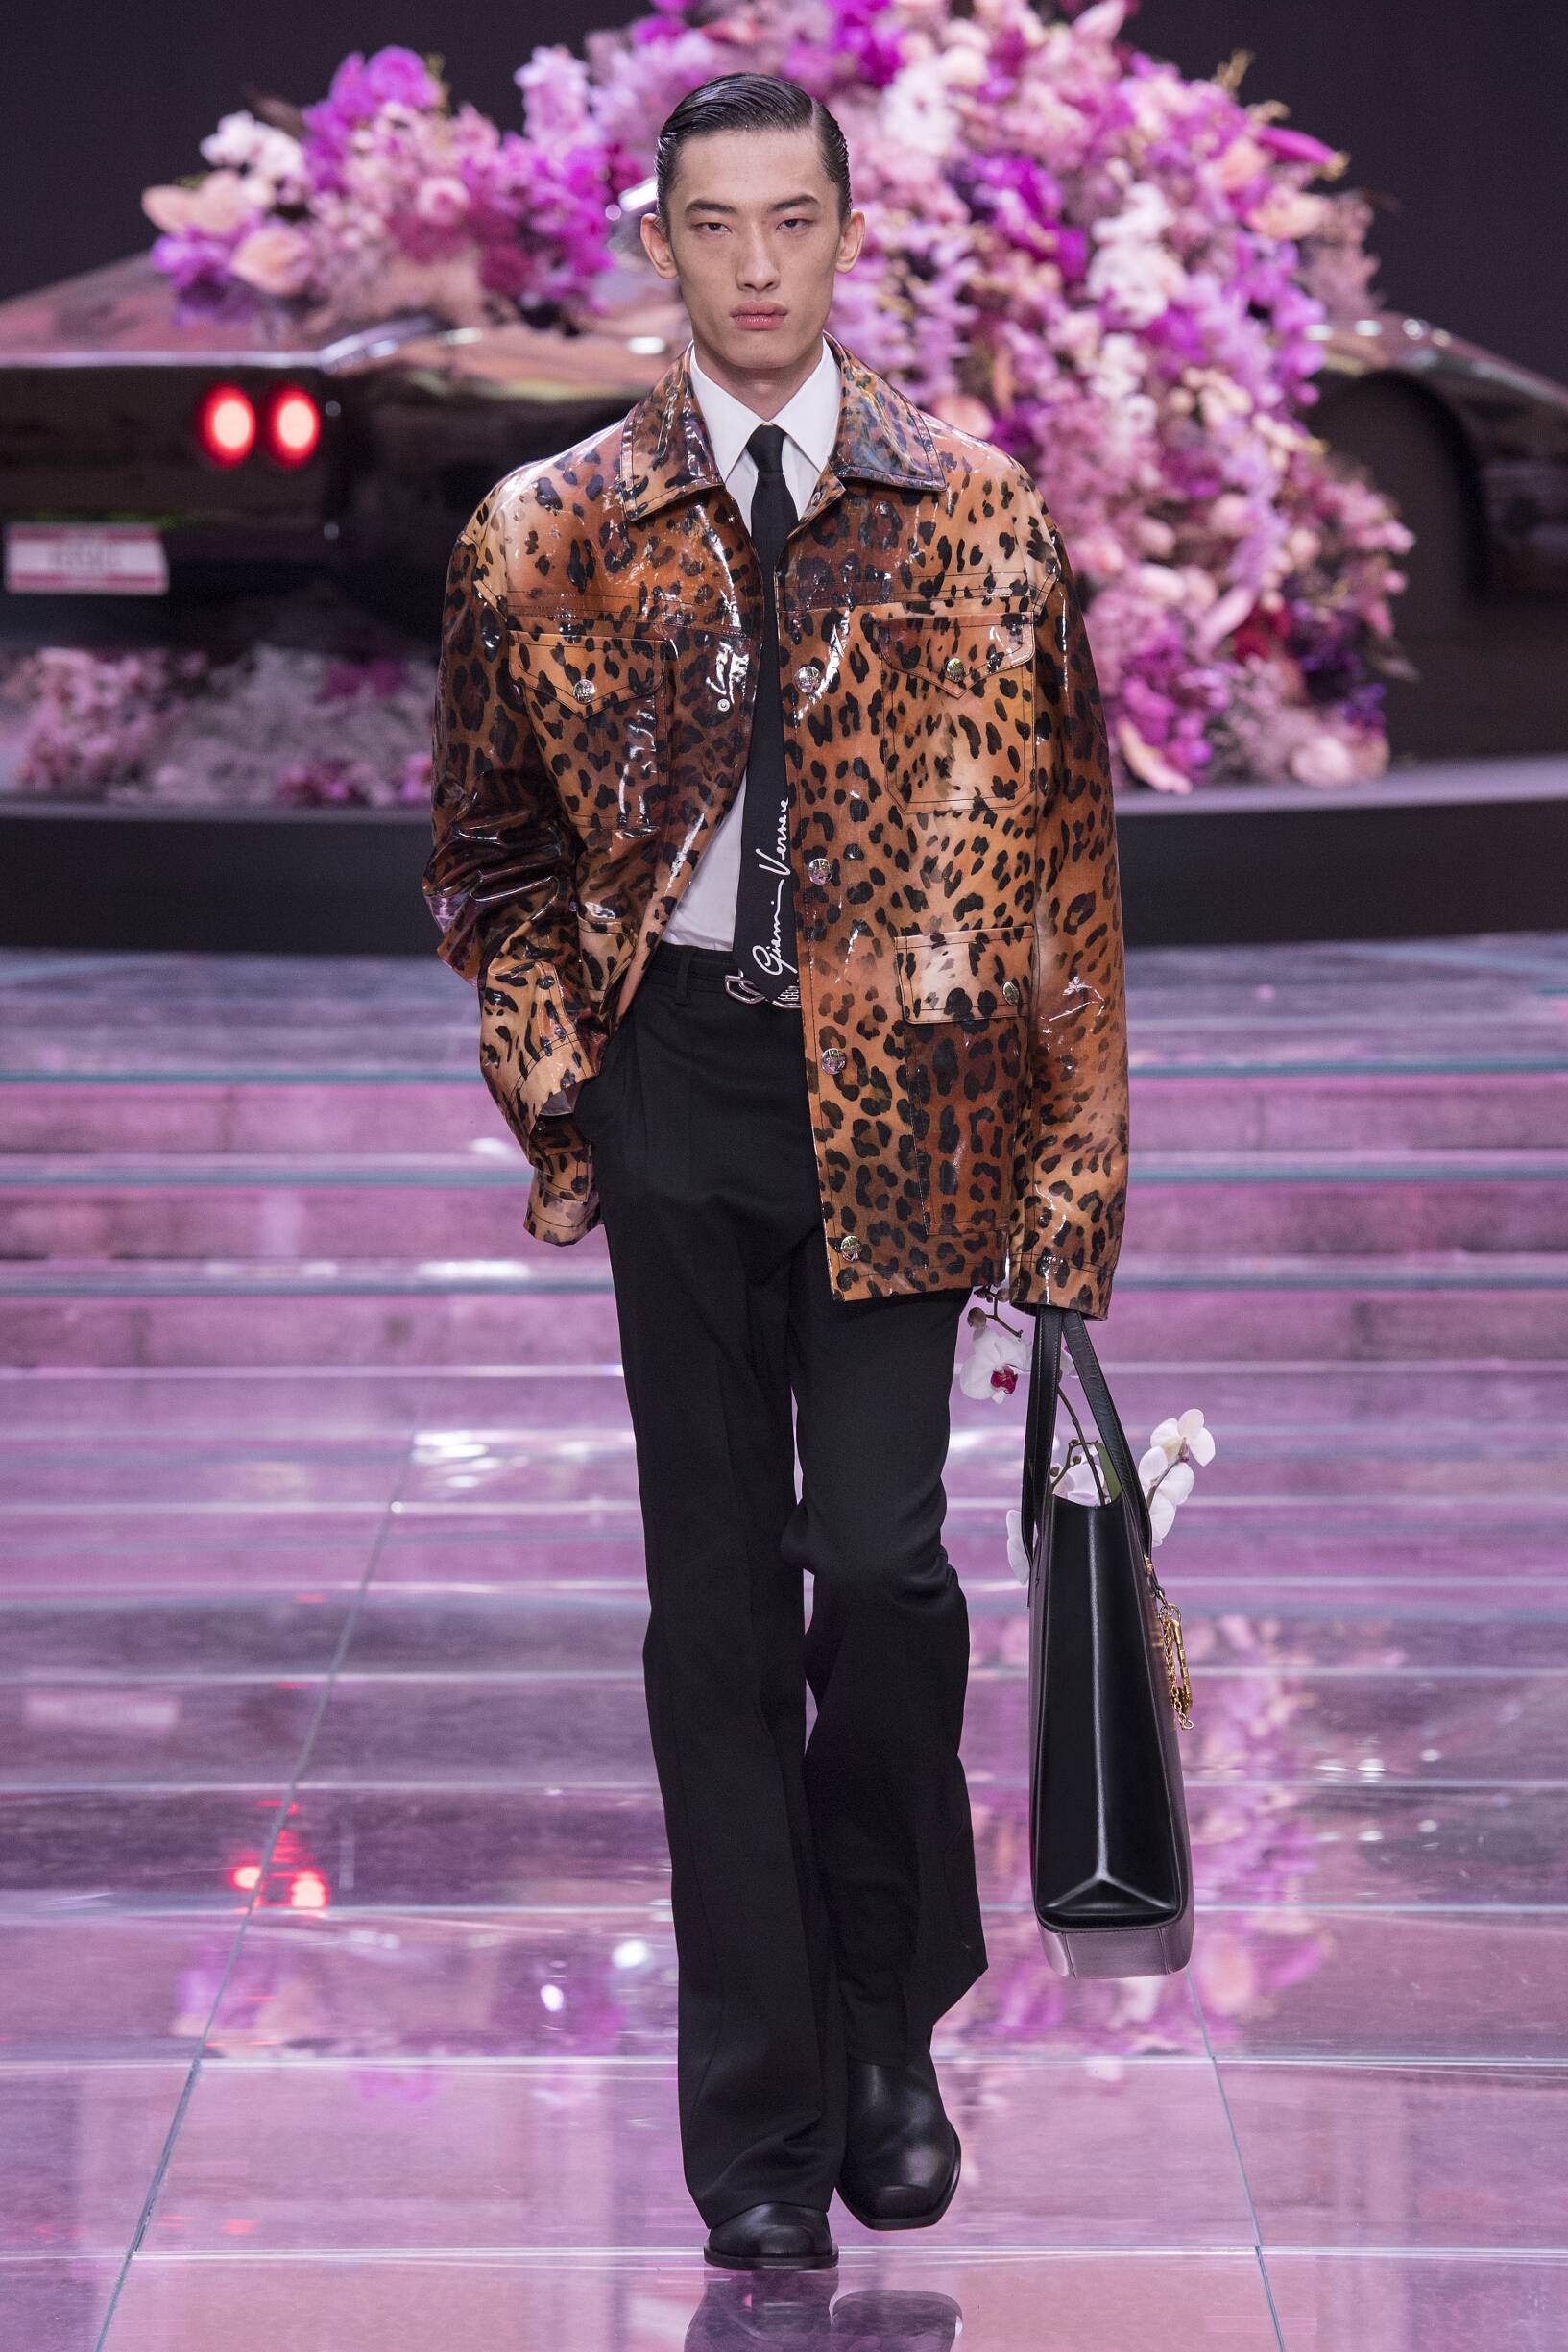 VERSACE SPRING SUMMER 2020 MEN’S COLLECTION | The Skinny Beep